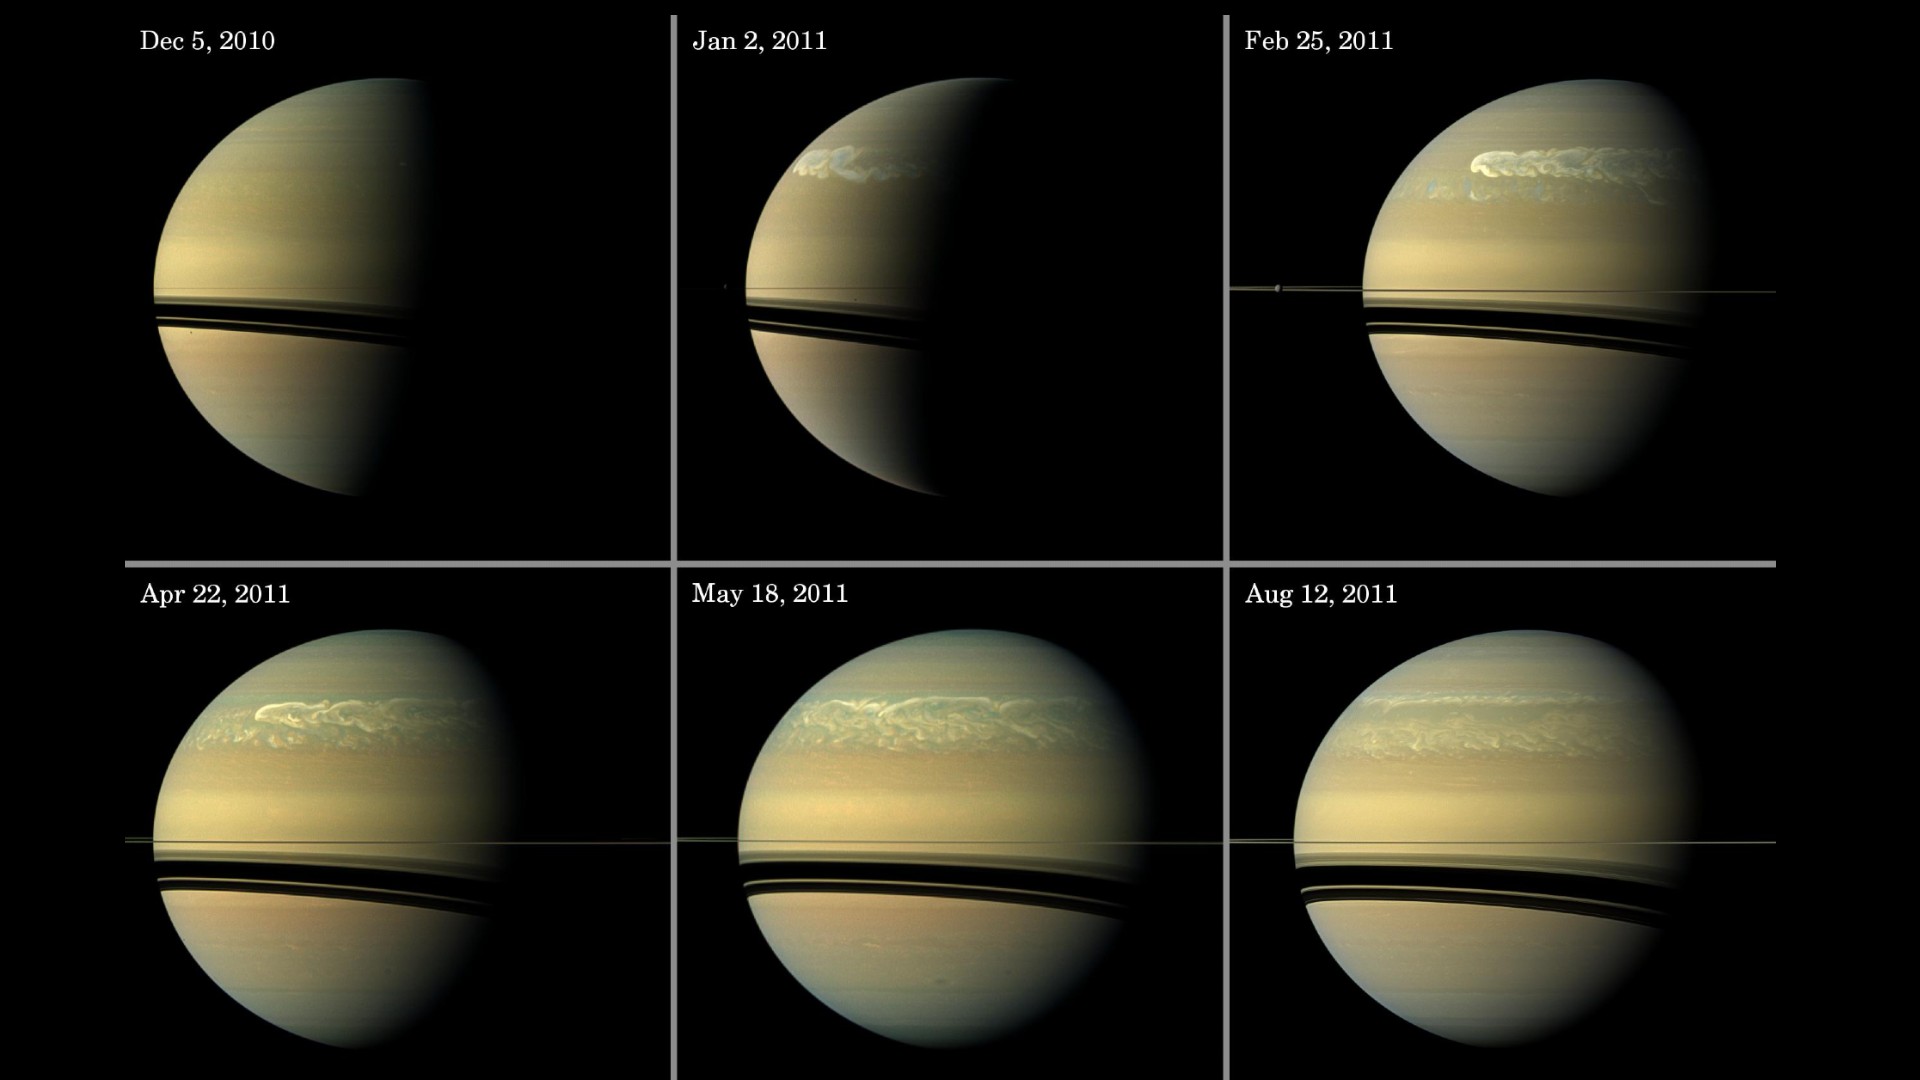 Series of images tracking the development of Saturn’s giant storm, as seen at visible wavelengths during much of 2011. NASA & JPL-Caltech & Space Science Institute